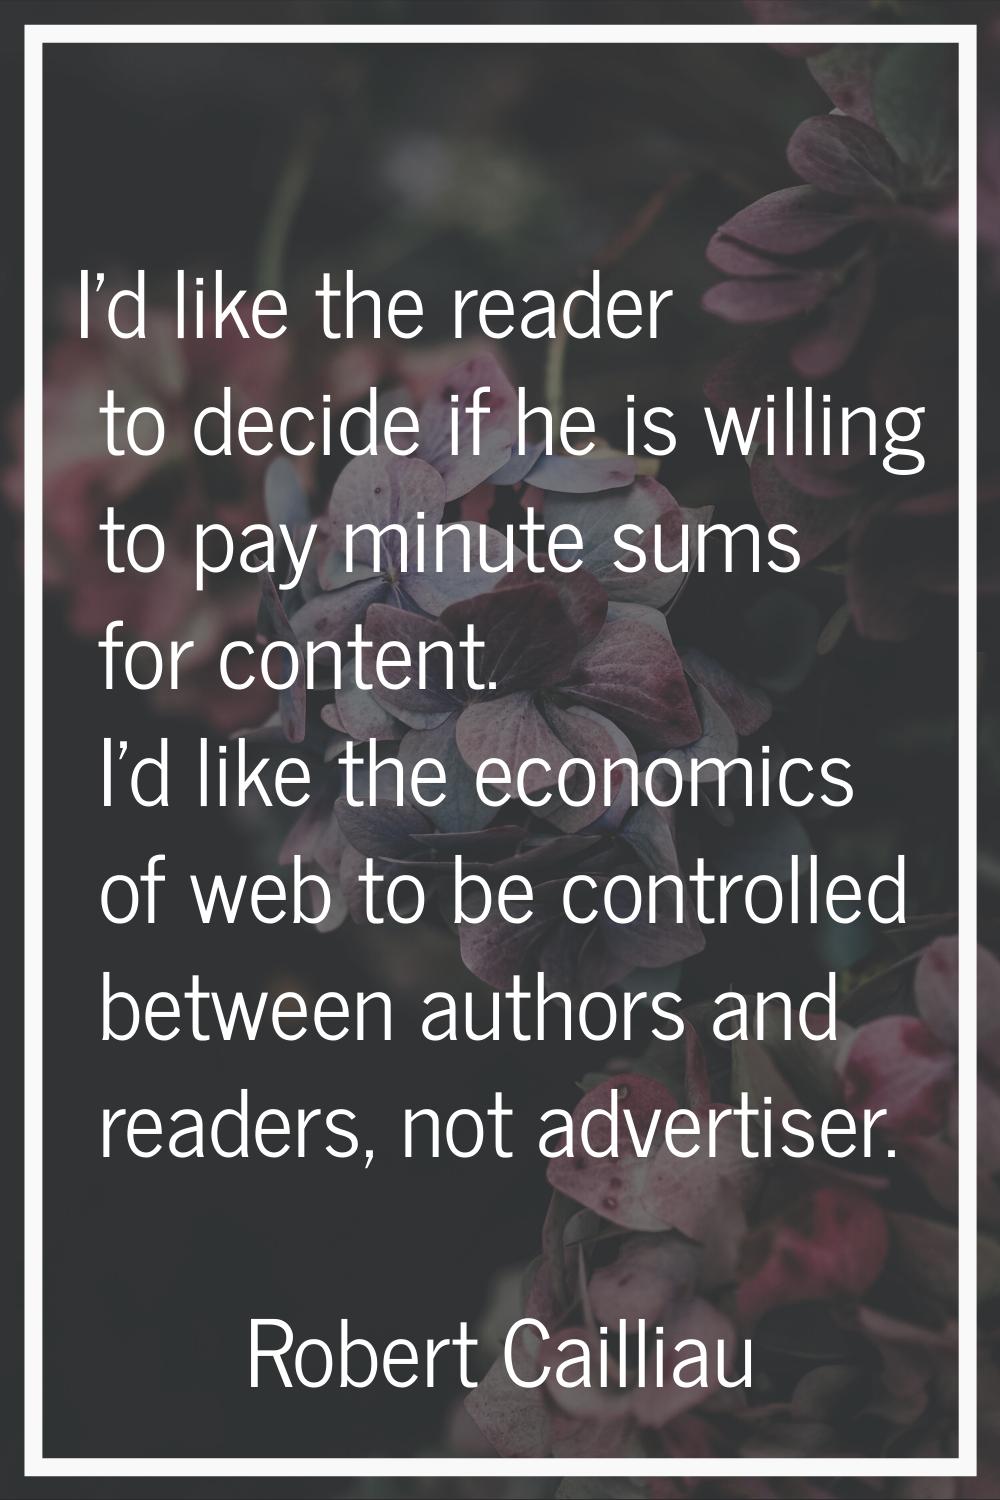 I'd like the reader to decide if he is willing to pay minute sums for content. I'd like the economi